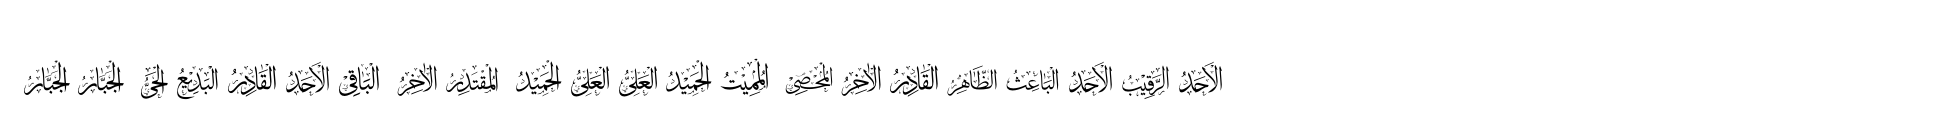 99 Names of ALLAH Complete